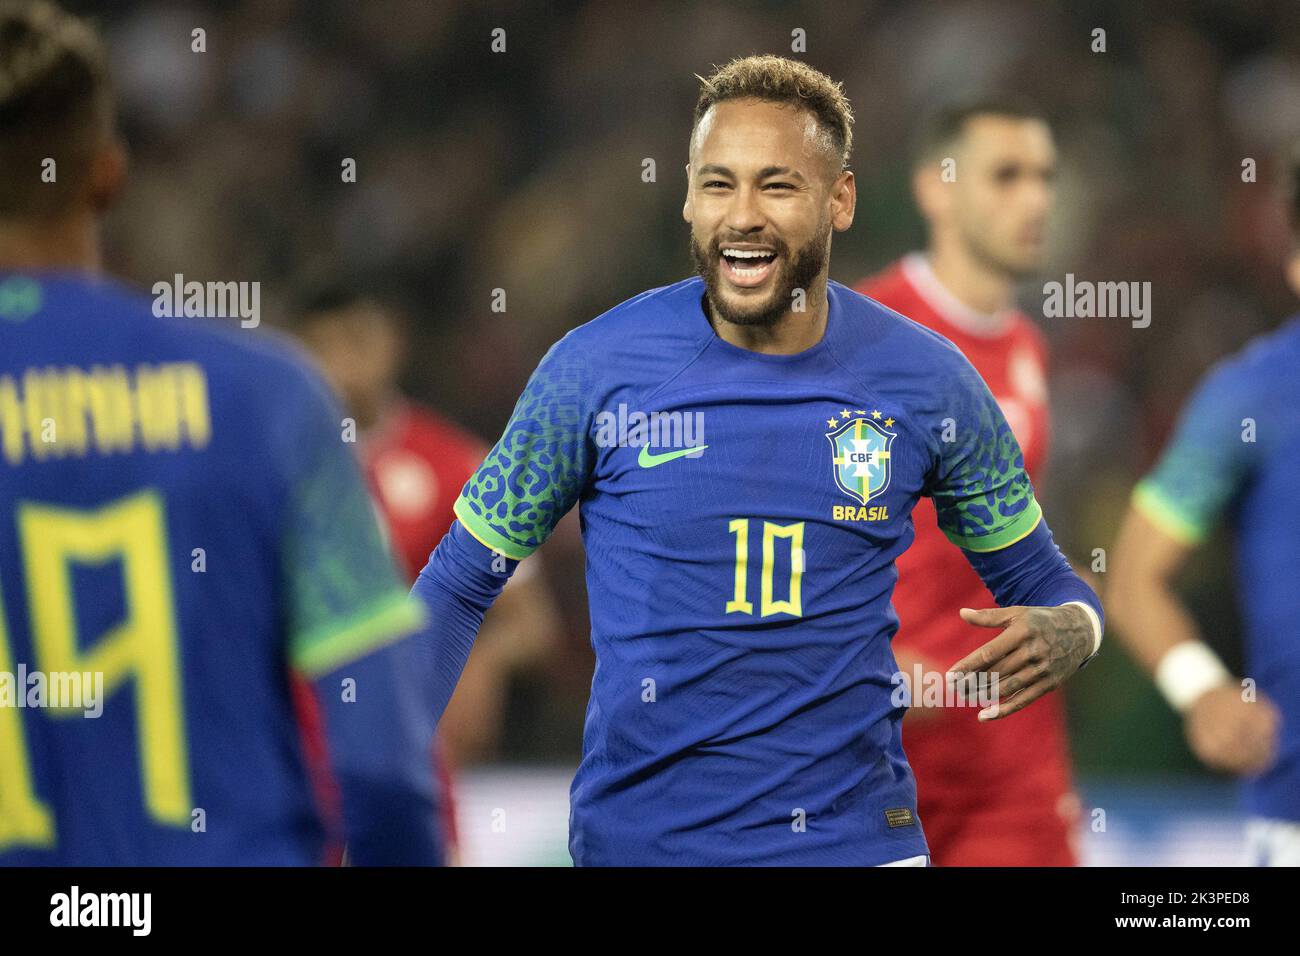 Paris, France, September 27, 2022, Neymar Junior of Brazil celebrates his goal during the international friendly match between Brazil and Tunisia at Parc des Princes, on September 27, 2022 in Paris, France. Photo by David Niviere/ABACAPRESS.COM Stock Photo